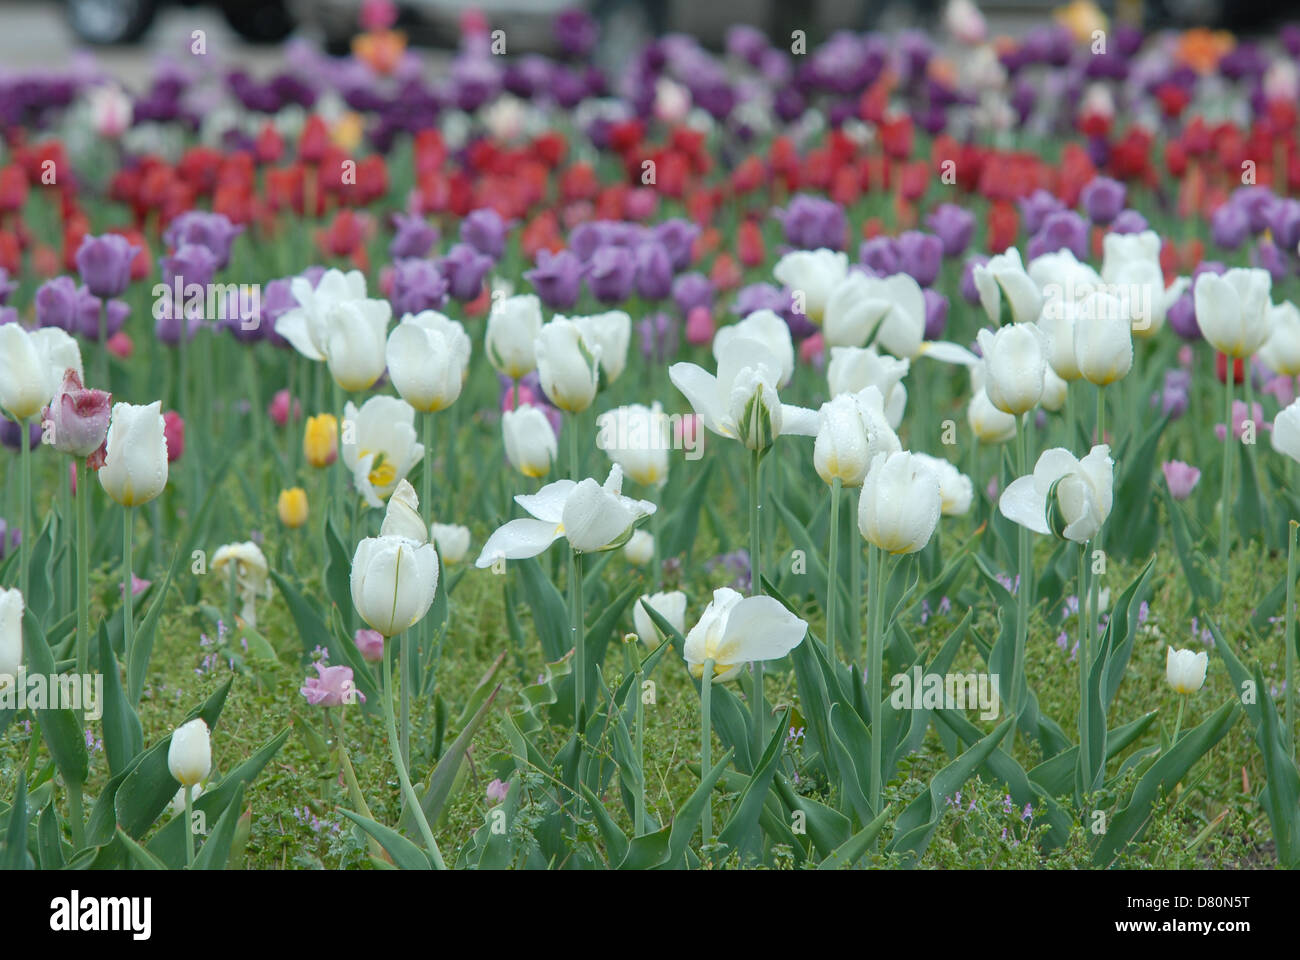 Beds of purple, red and white tulips at Tulip Time in Holland, Michigan. Stock Photo